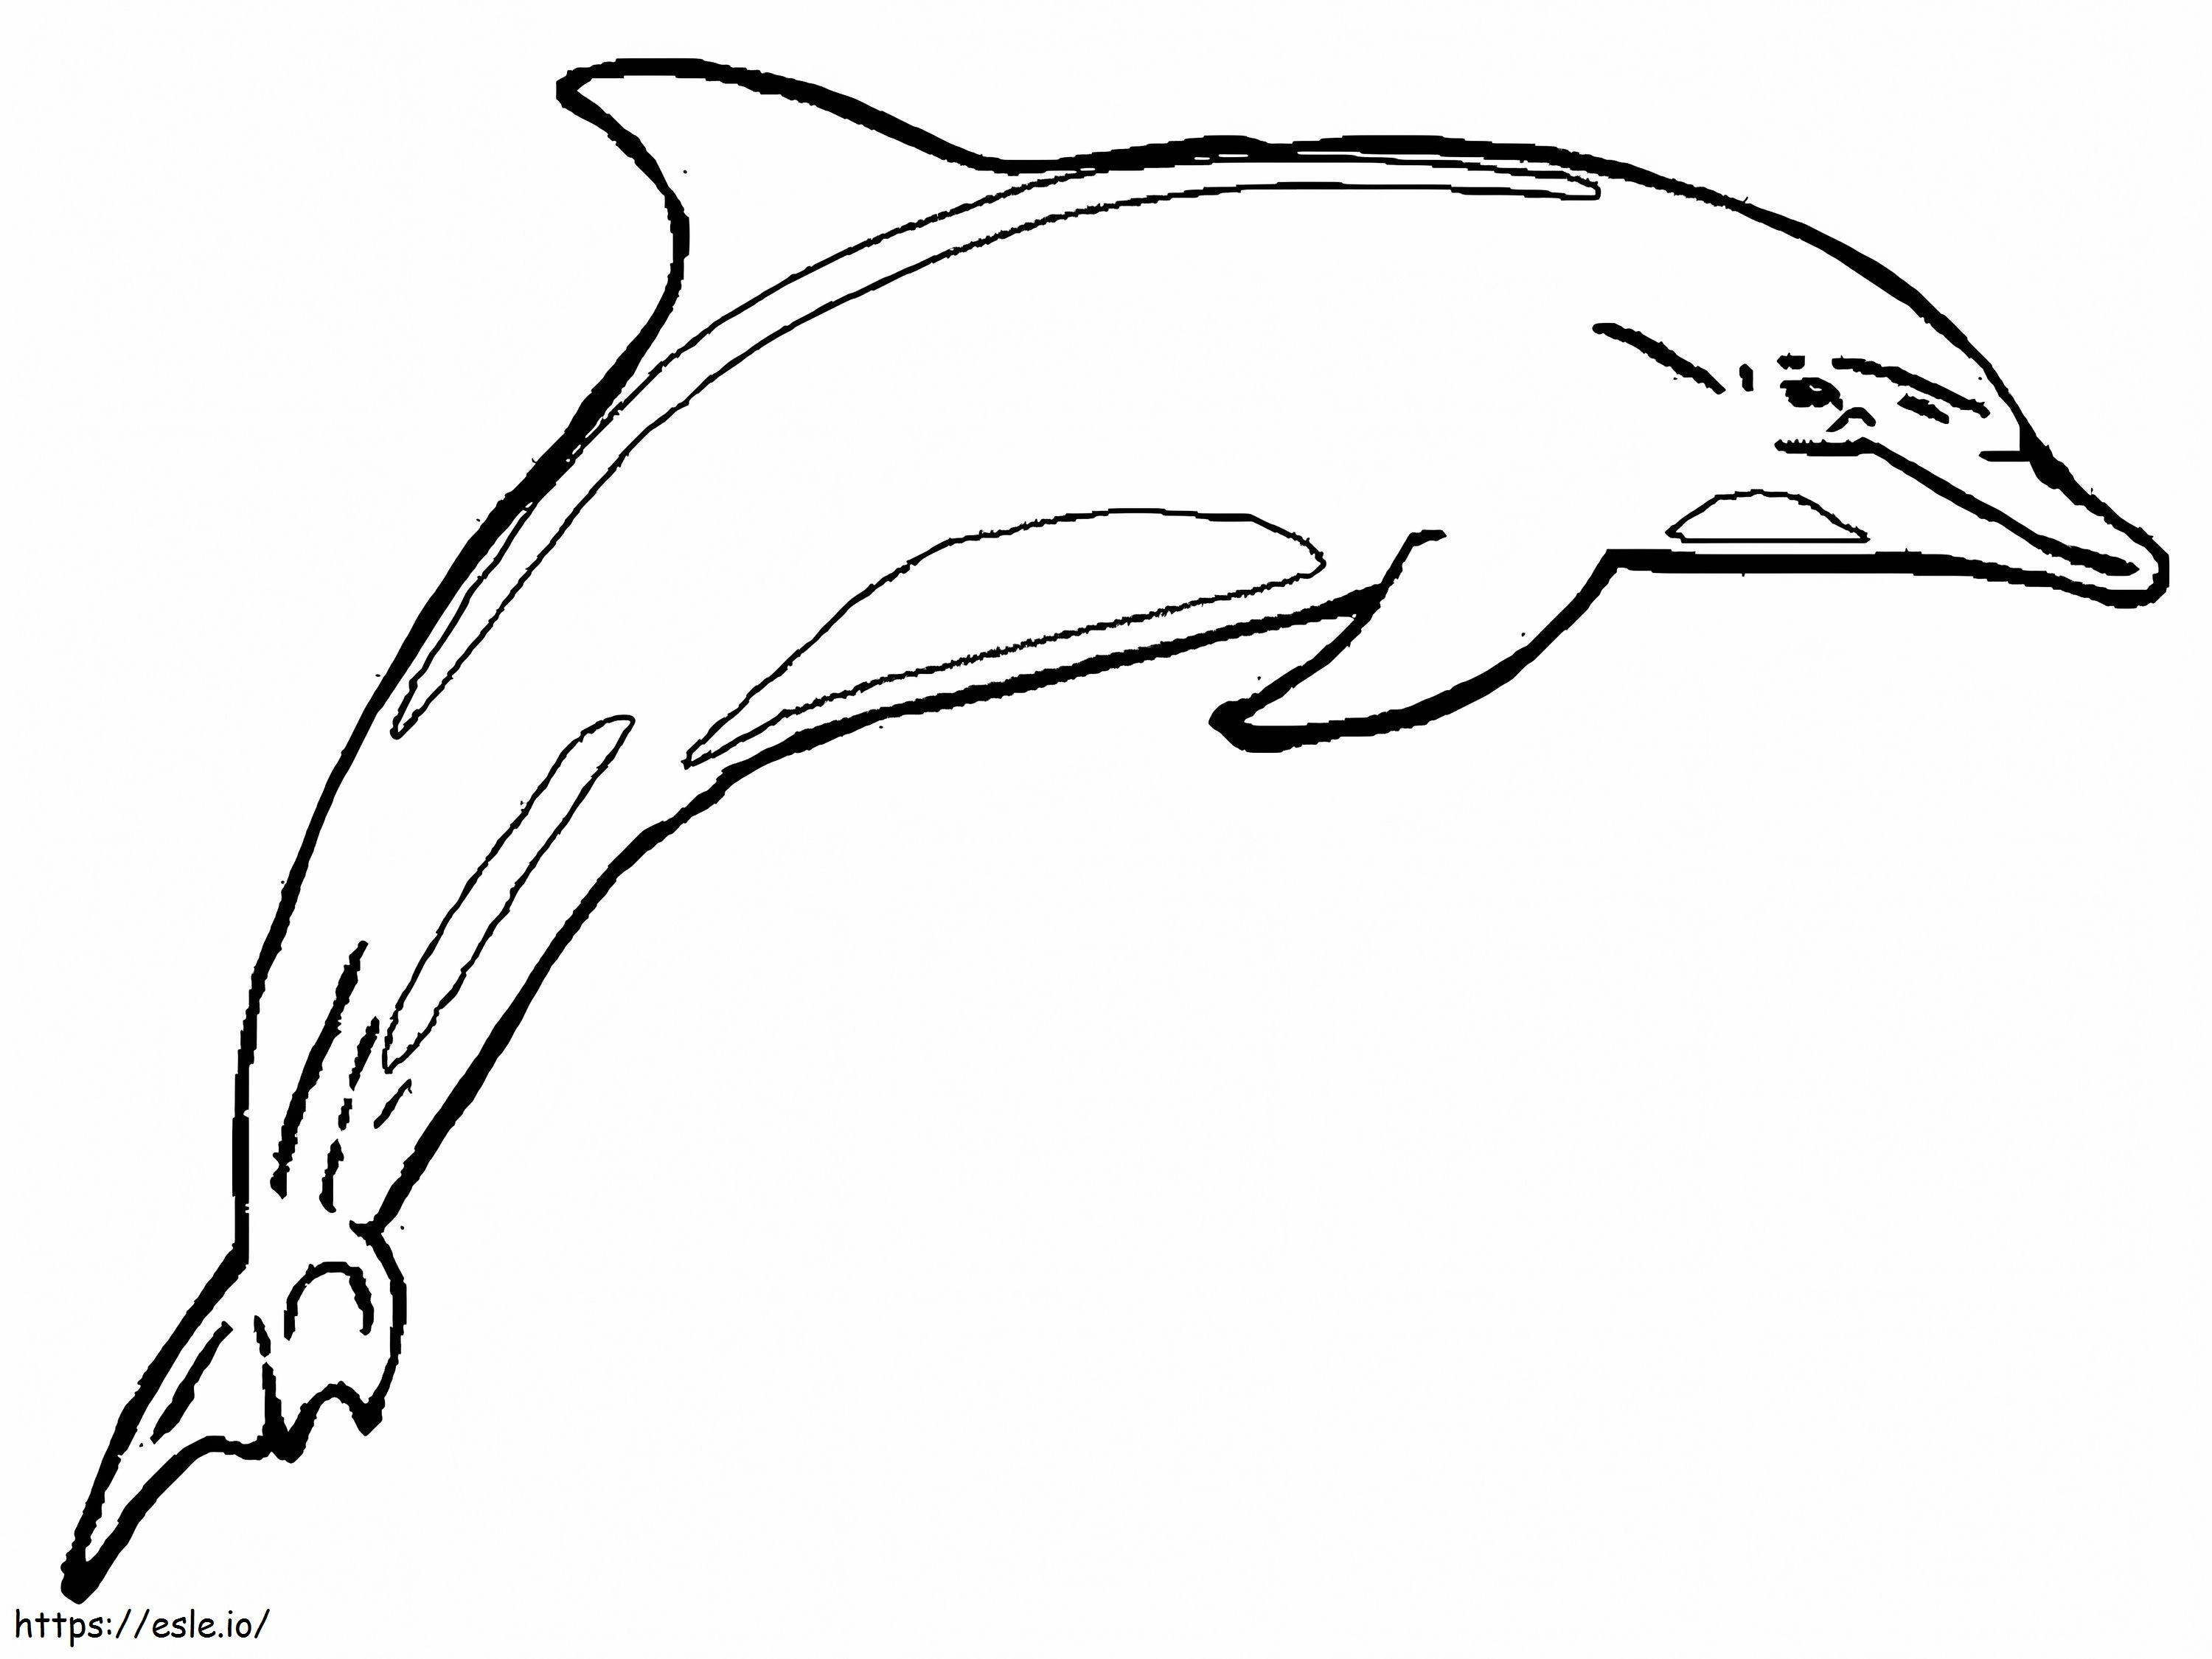 Normal Dolphin coloring page